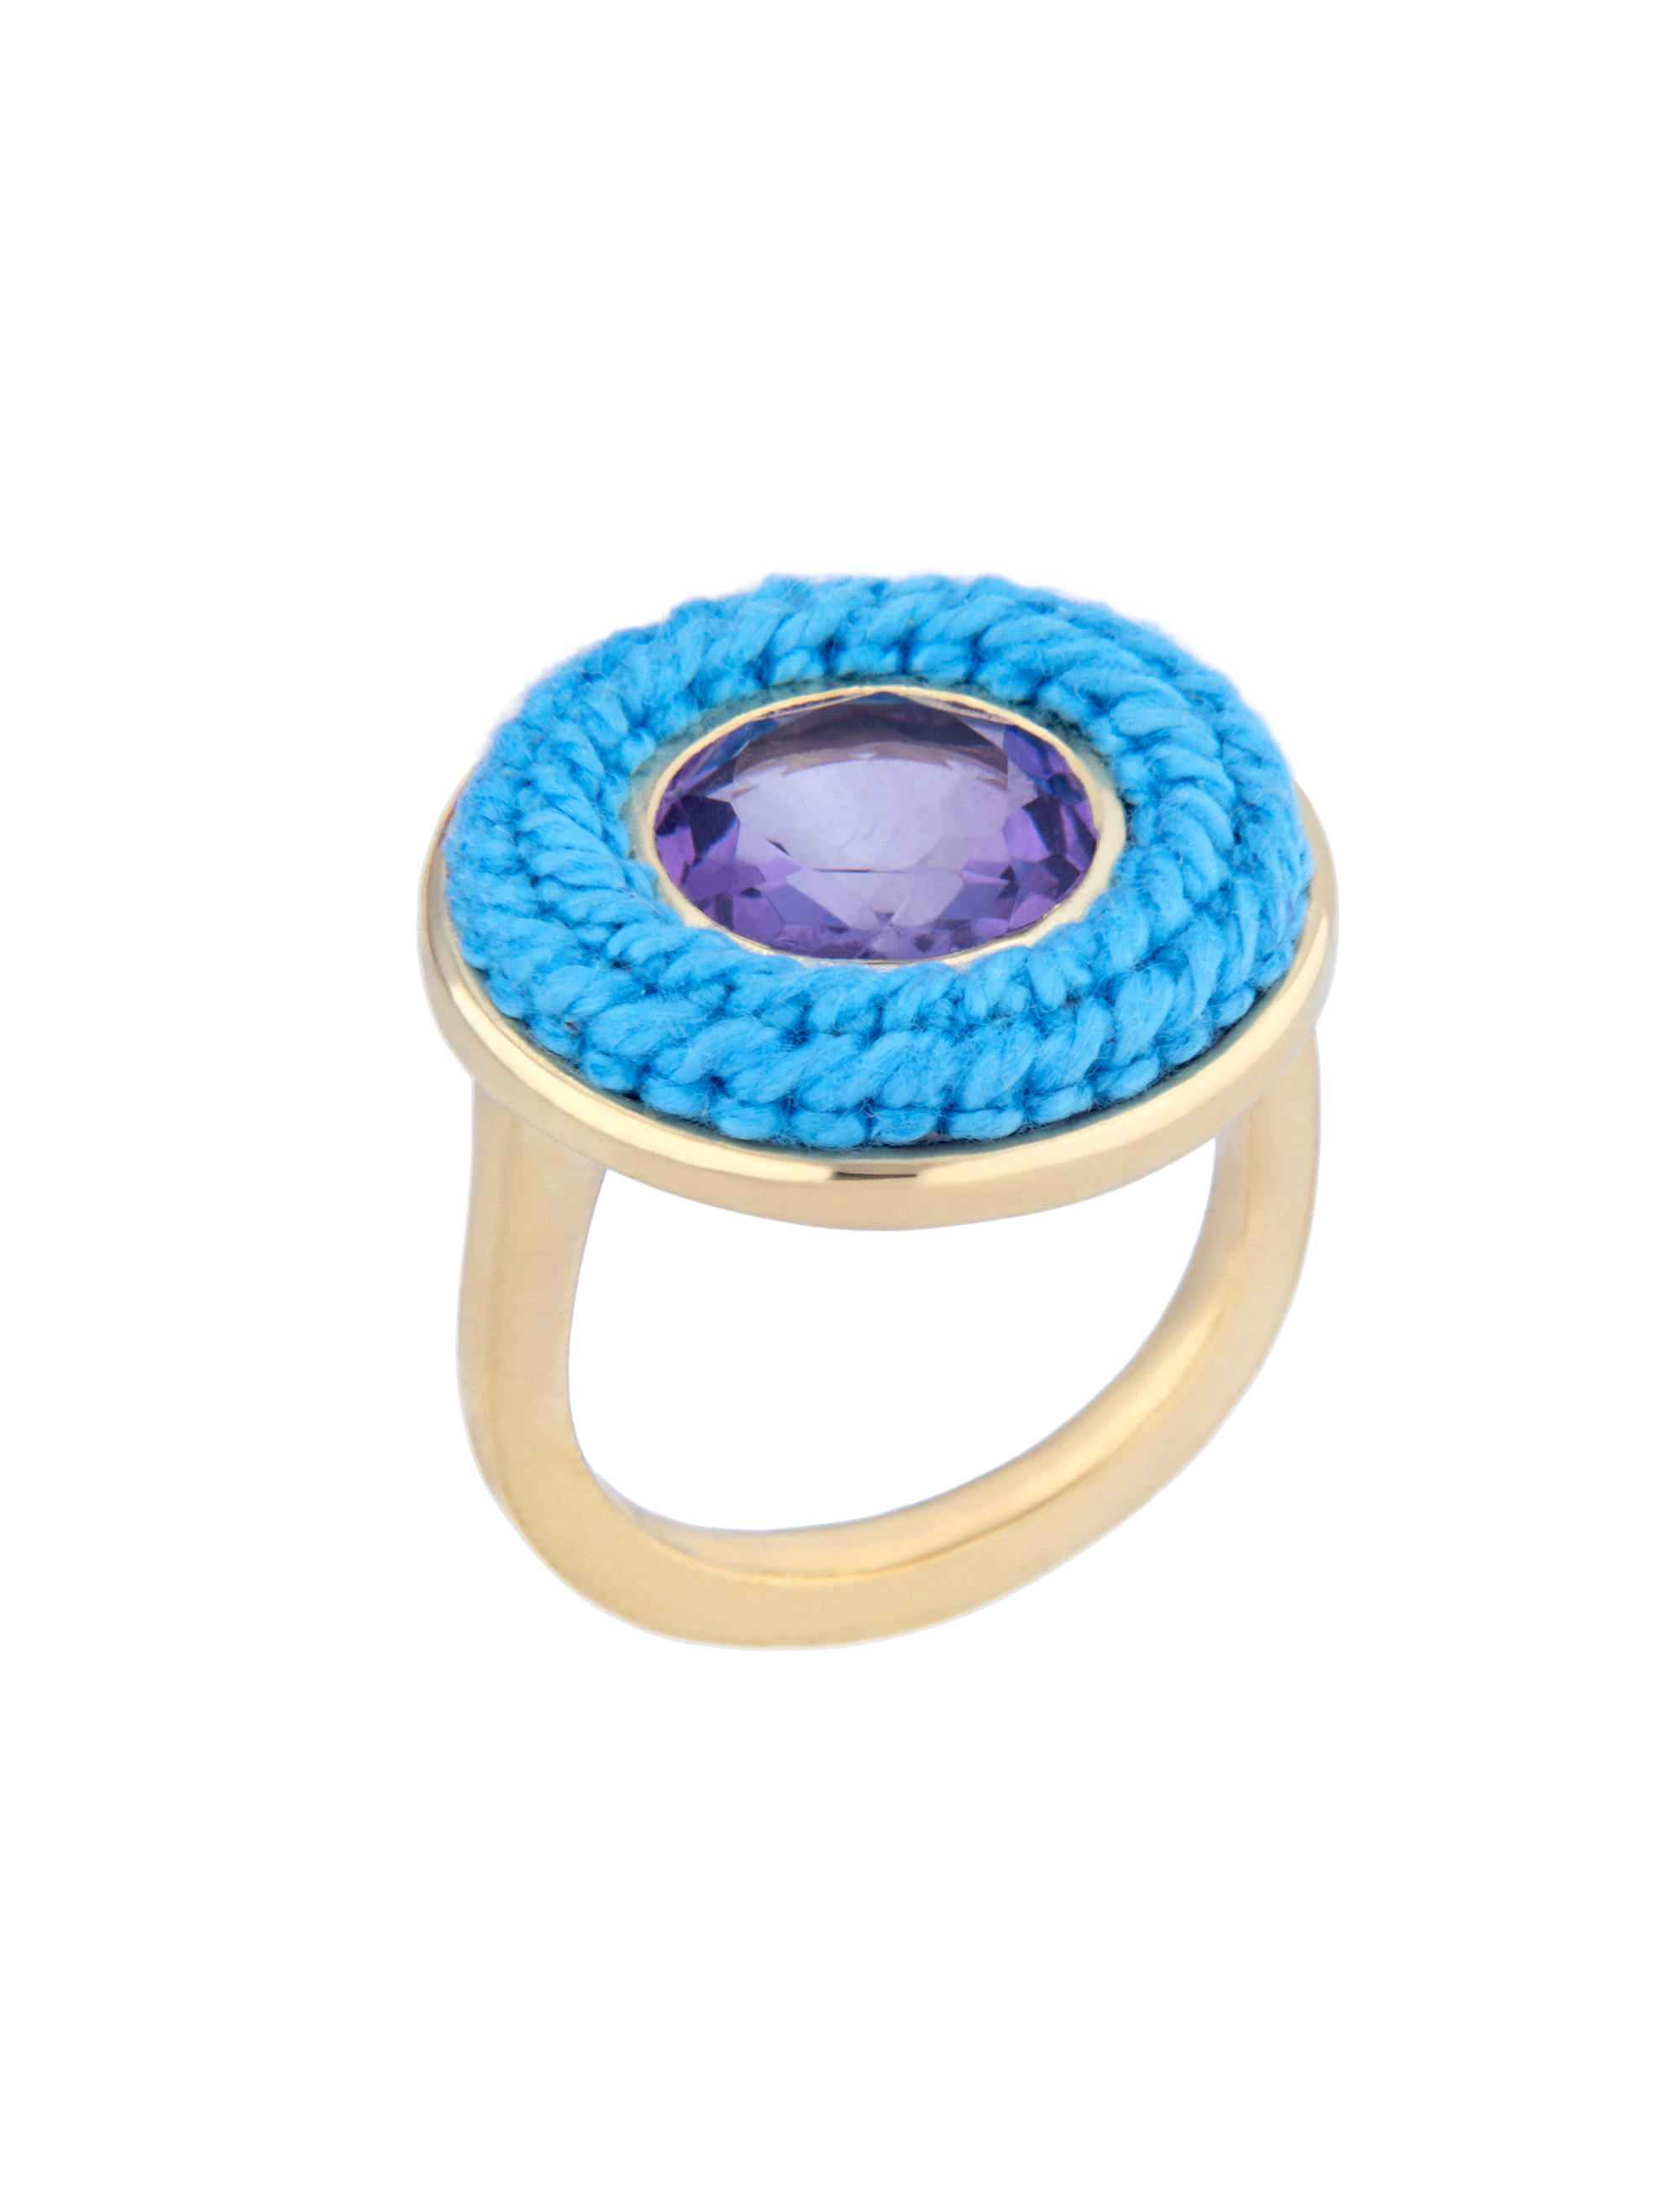 Small Blue Tambourine Ring with Amethyst